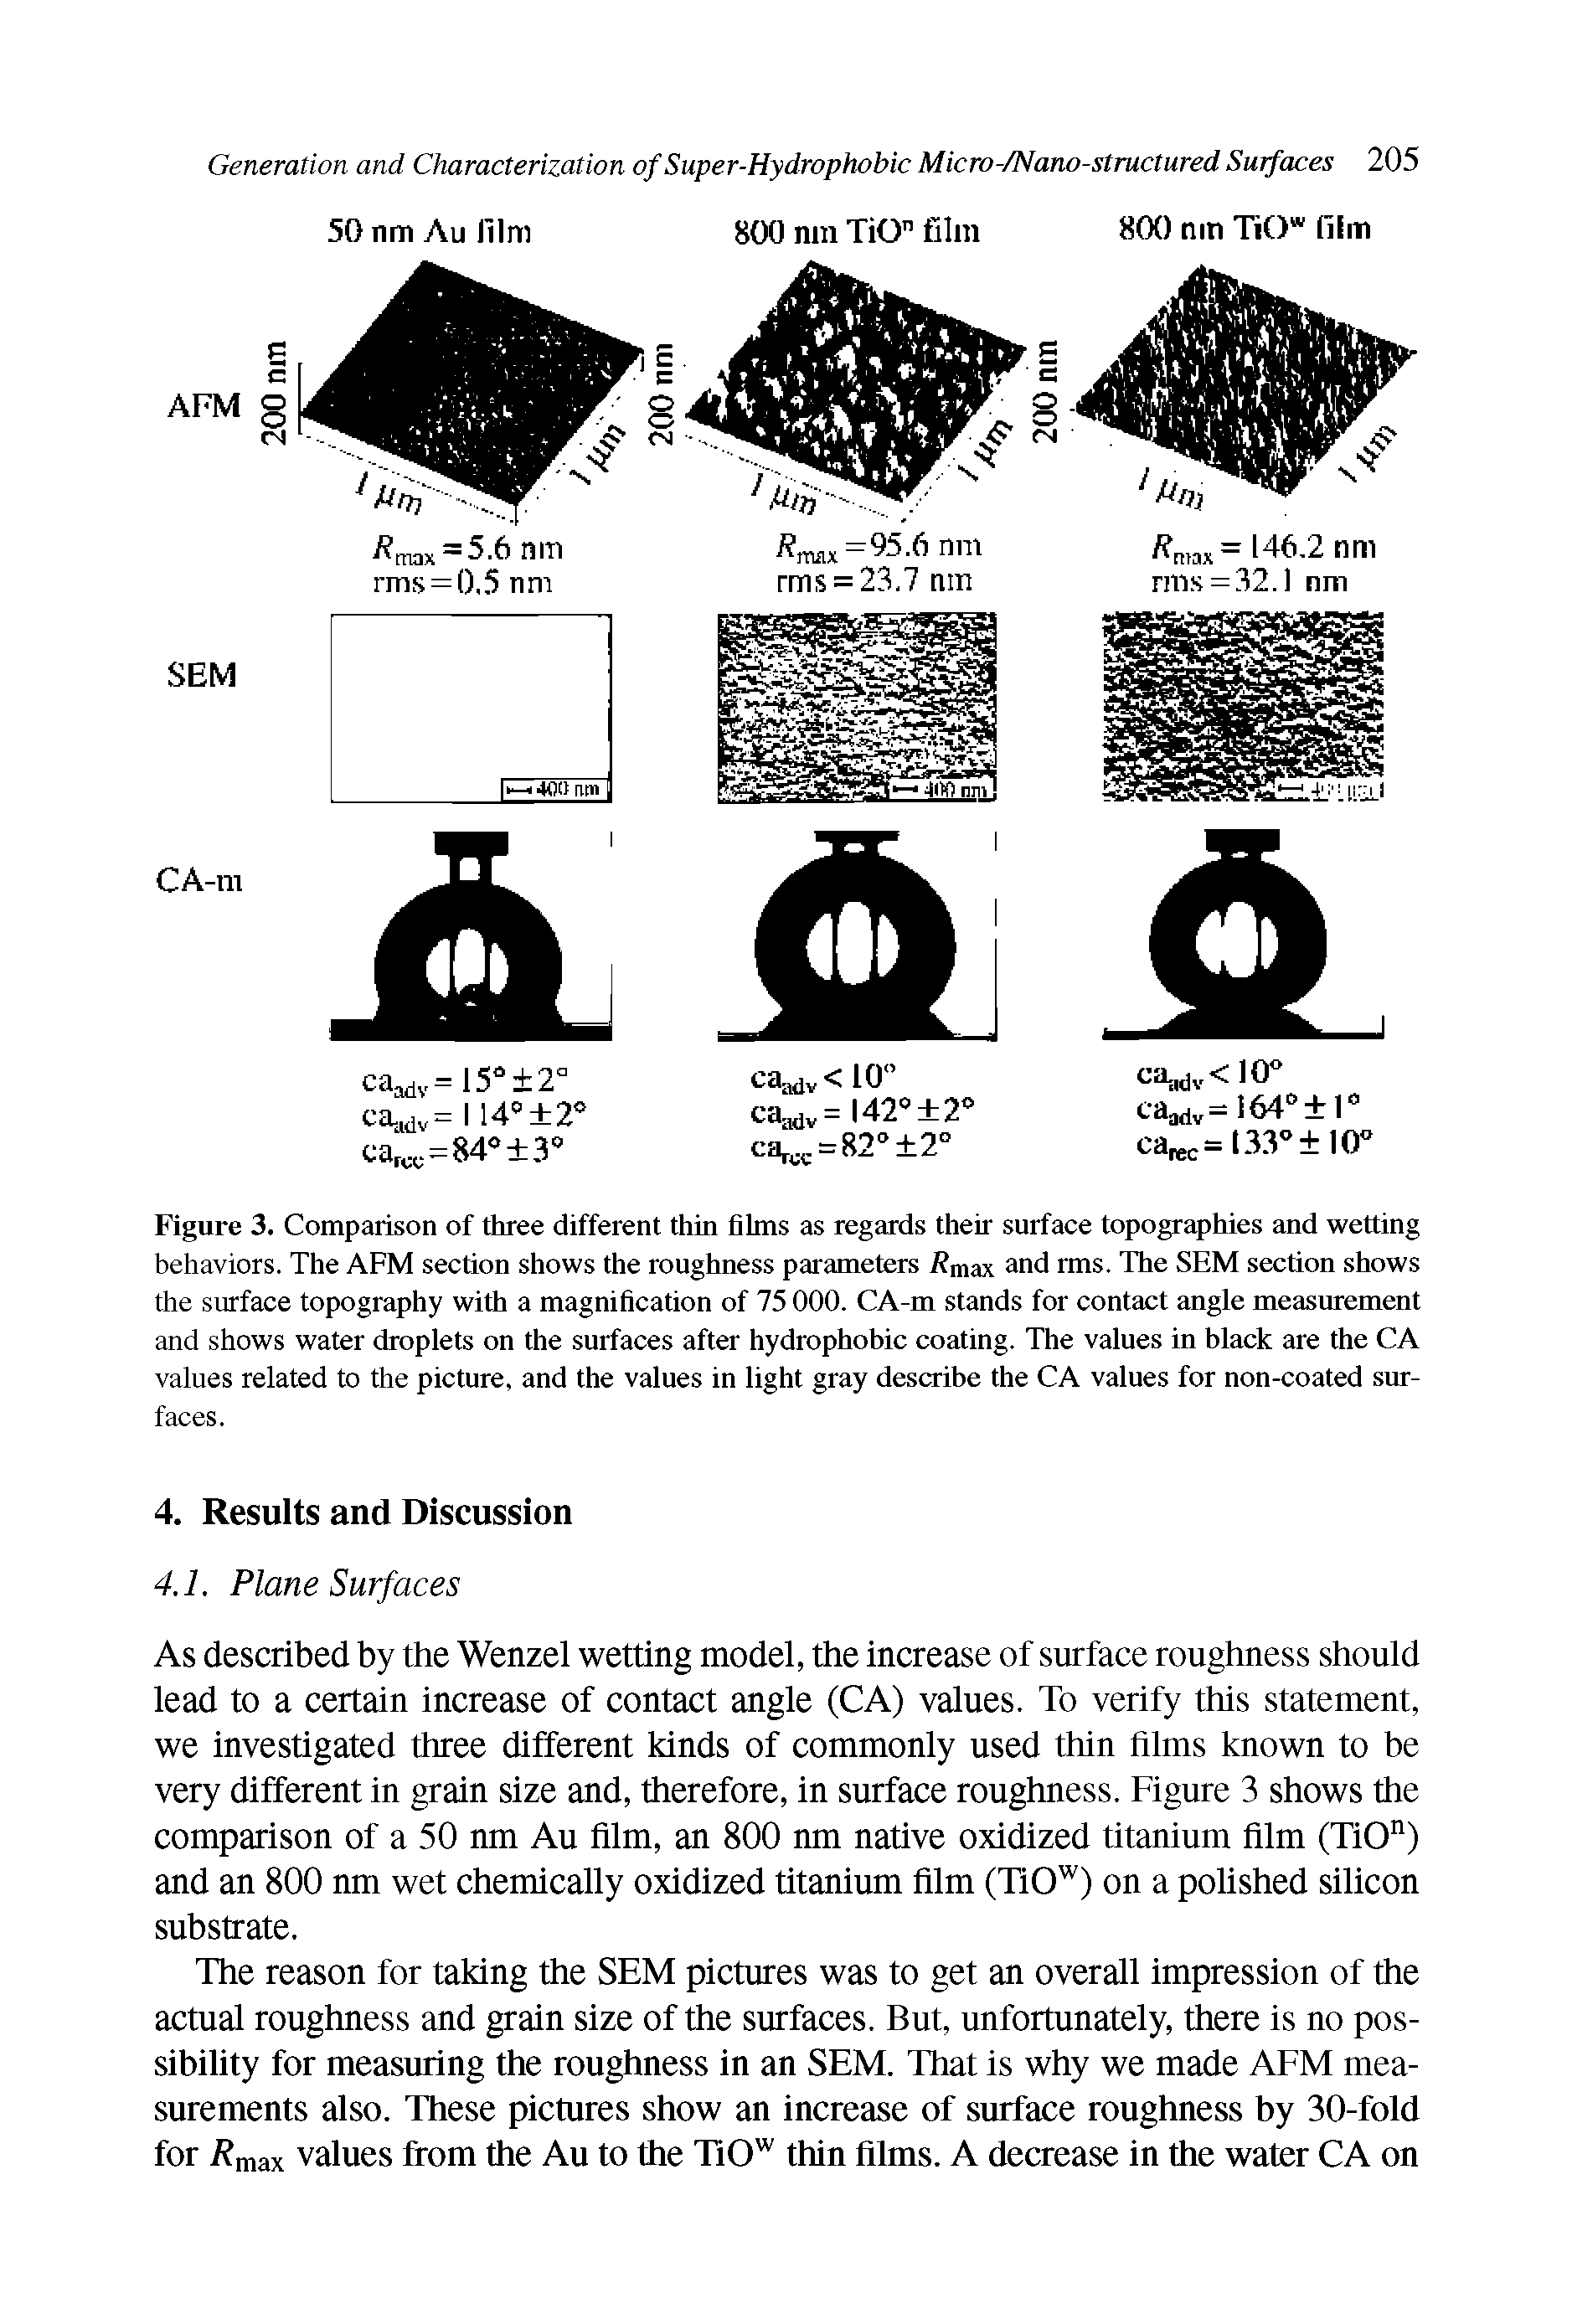 Figure 3. Comparison of three different thin films as regards their surface topographies and wetting behaviors. The AFM section shows the roughness parameters Umax and rms. The SEM section shows the surface topography with a magnification of 75 000. CA-m stands for contact angle measurement and shows water droplets on the surfaces after hydrophobic coating. The values in hlack are the CA values related to the picture, and the values in light gray descrihe the CA values for non-coated surfaces.